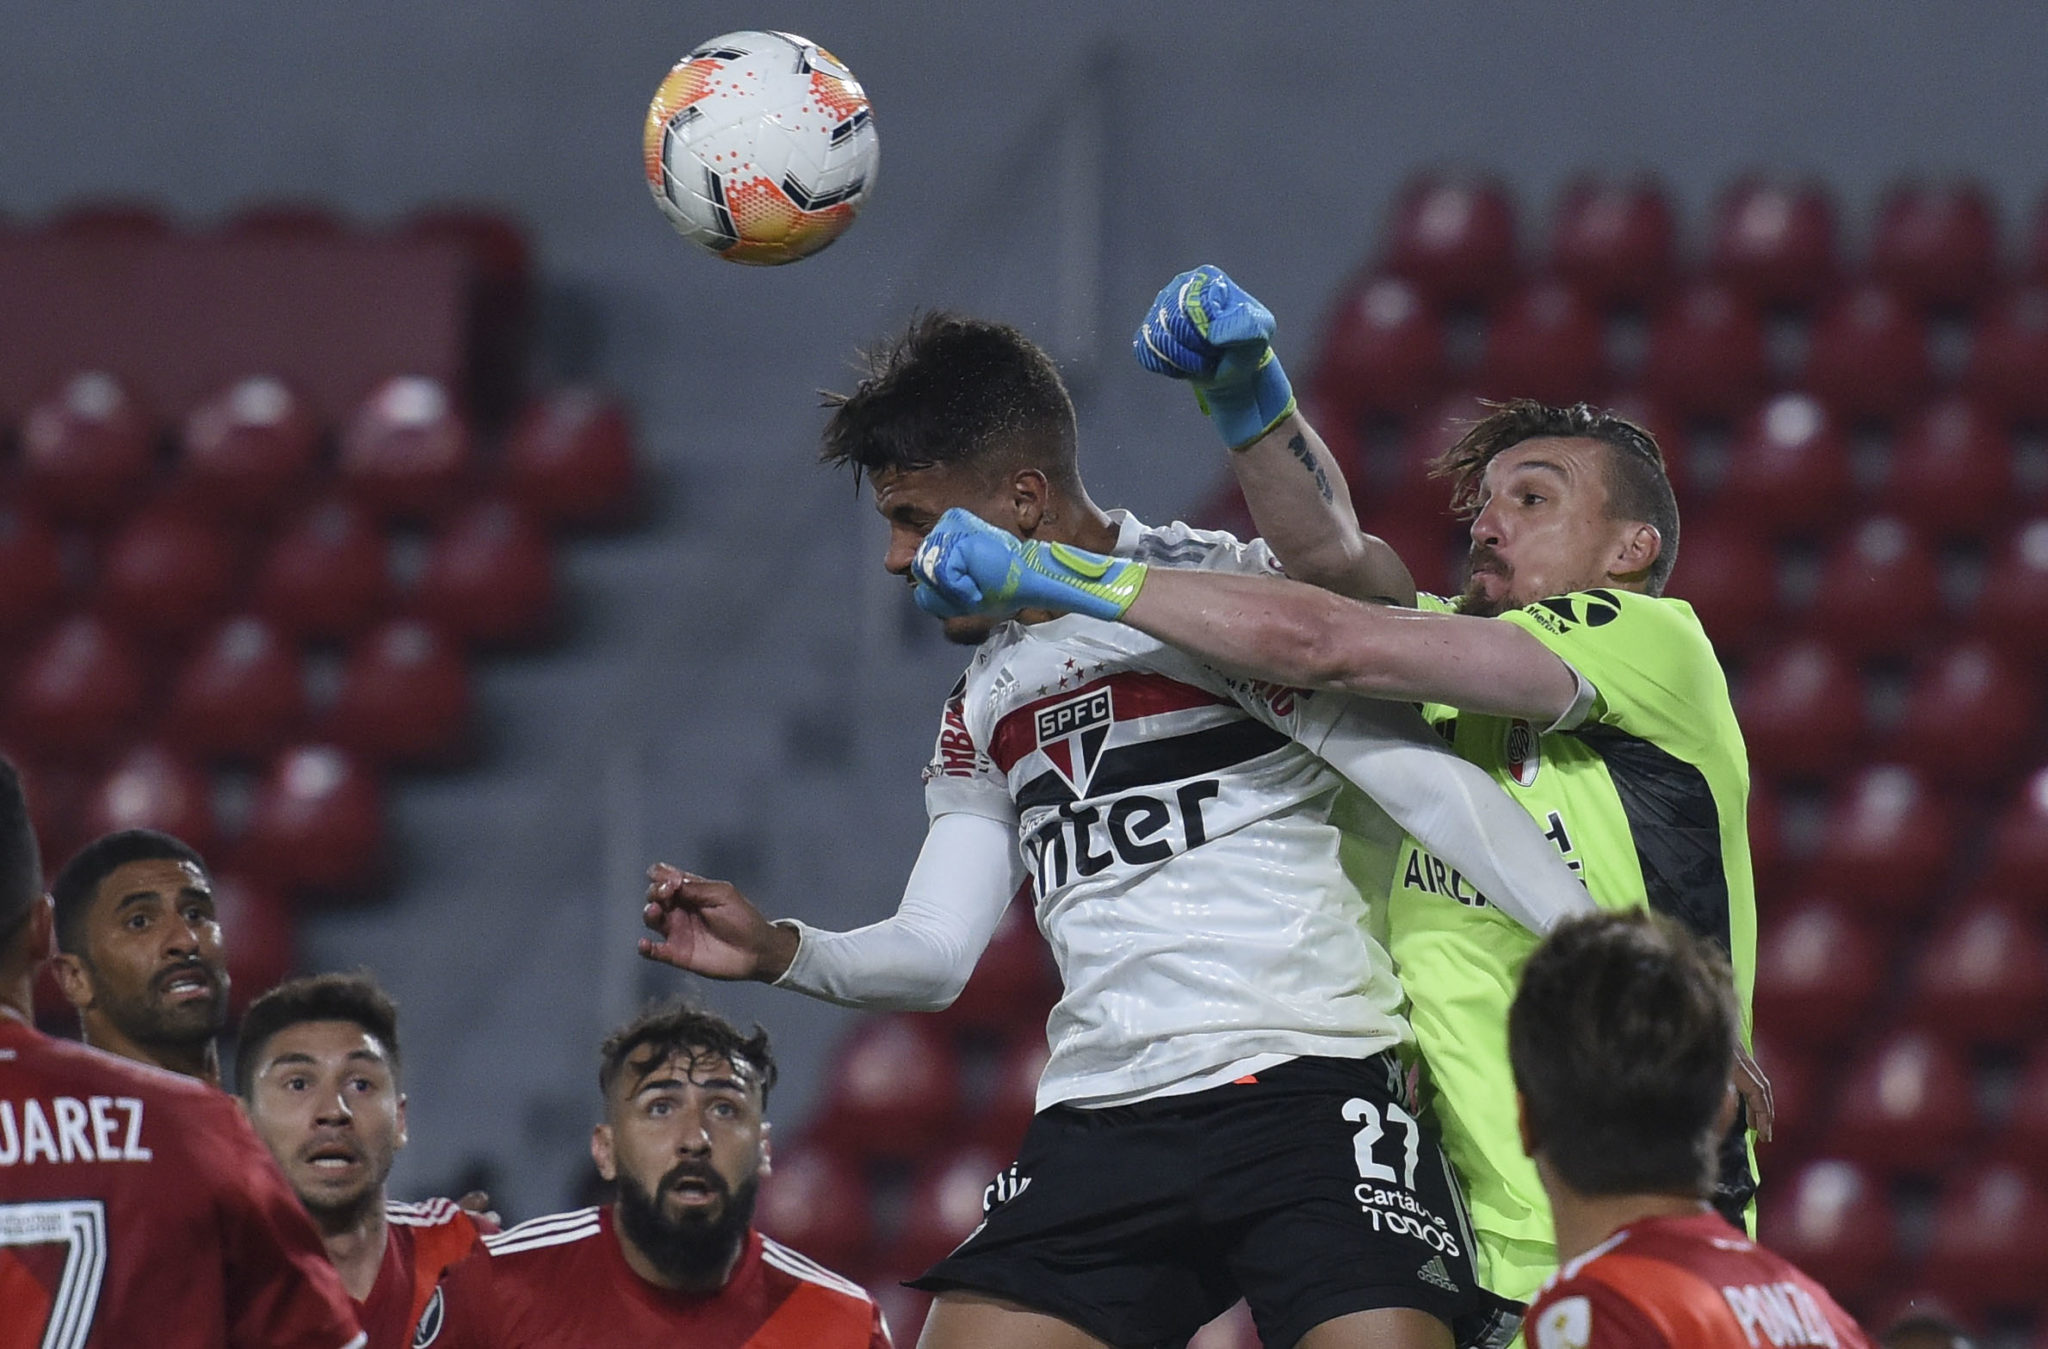 Brazil's Sao Paulo defender Diego Costa and Argentina's River Plate goalkeeper Franco Armani vie for the ball during their closed-door Copa Libertadores group phase football match at the Libertadores de America (Monumental) Stadium in Avellaneda, Buenos Aires, Argentina, on September 30, 2020, amid the COVID-19 novel coronavirus pandemic. (Photo by Marcelo Endelli / POOL / AFP) (Photo by MARCELO ENDELLI/POOL/AFP via Getty Images)